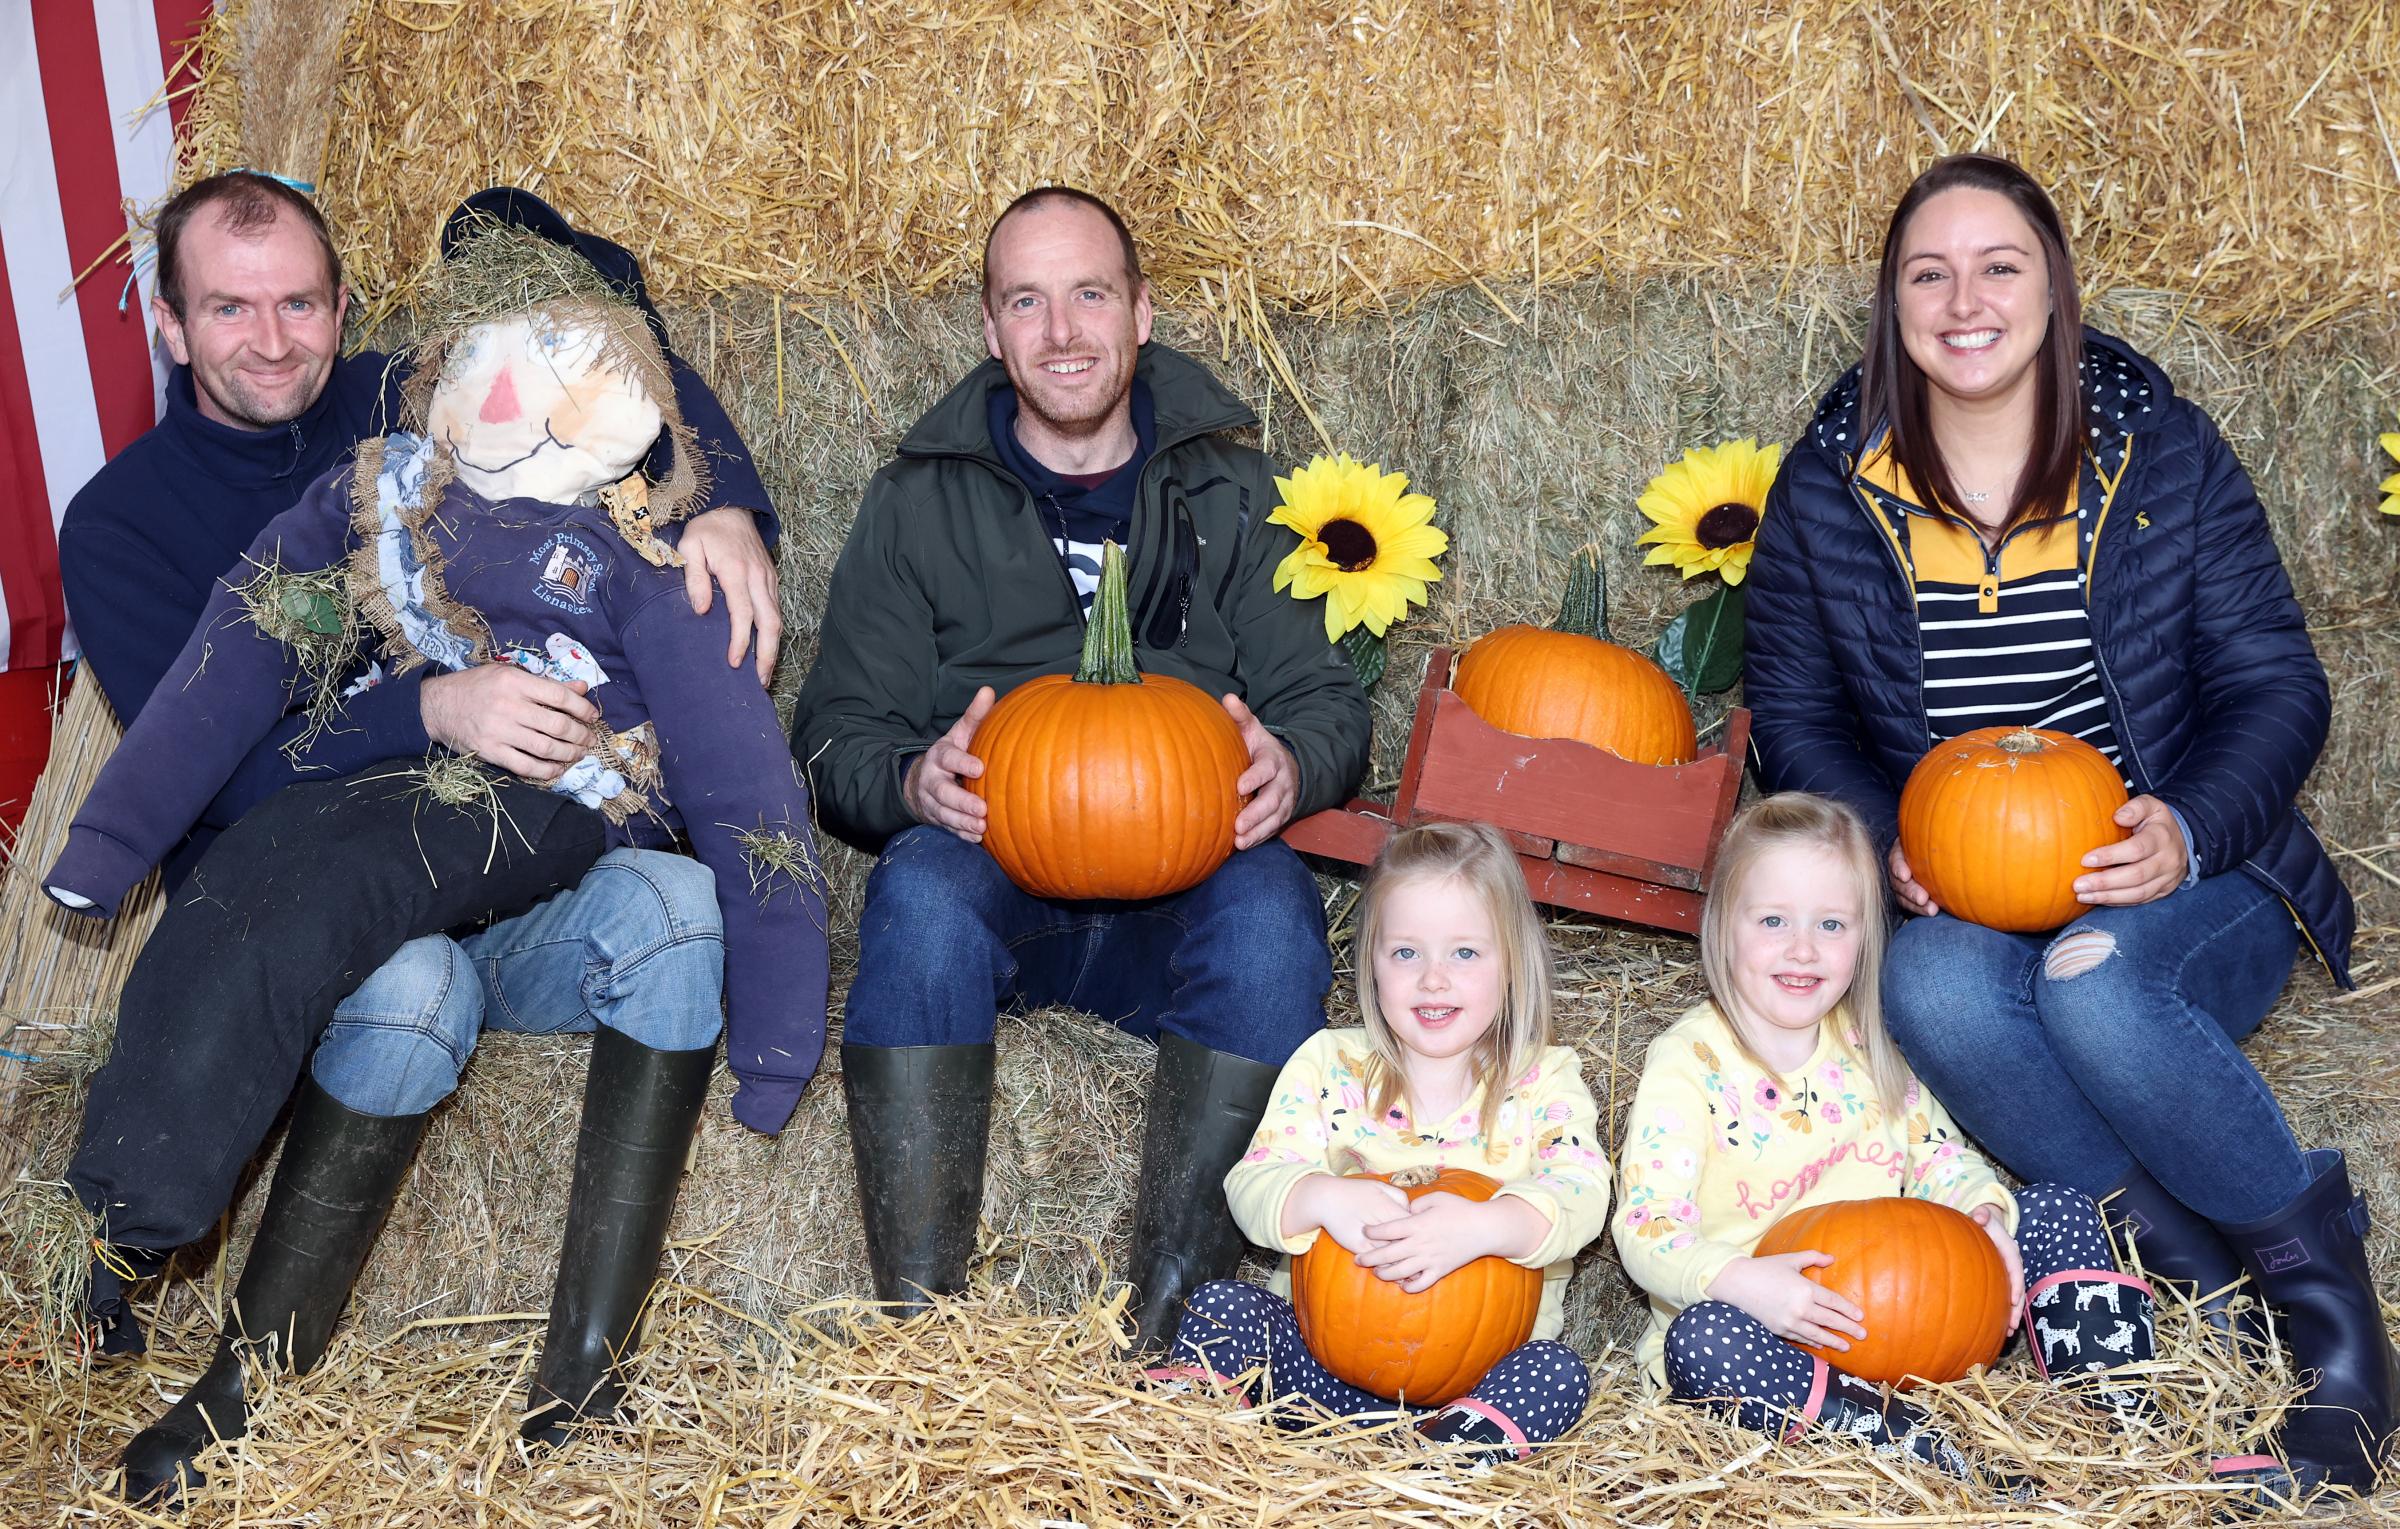 Enjoying the Pumpkin Day at Lappins Vegetable Farm are from left, Kyle Livingstone, Alan Burleigh and Melissa Bereseford. Seated are Ellie and Evie Burleigh.